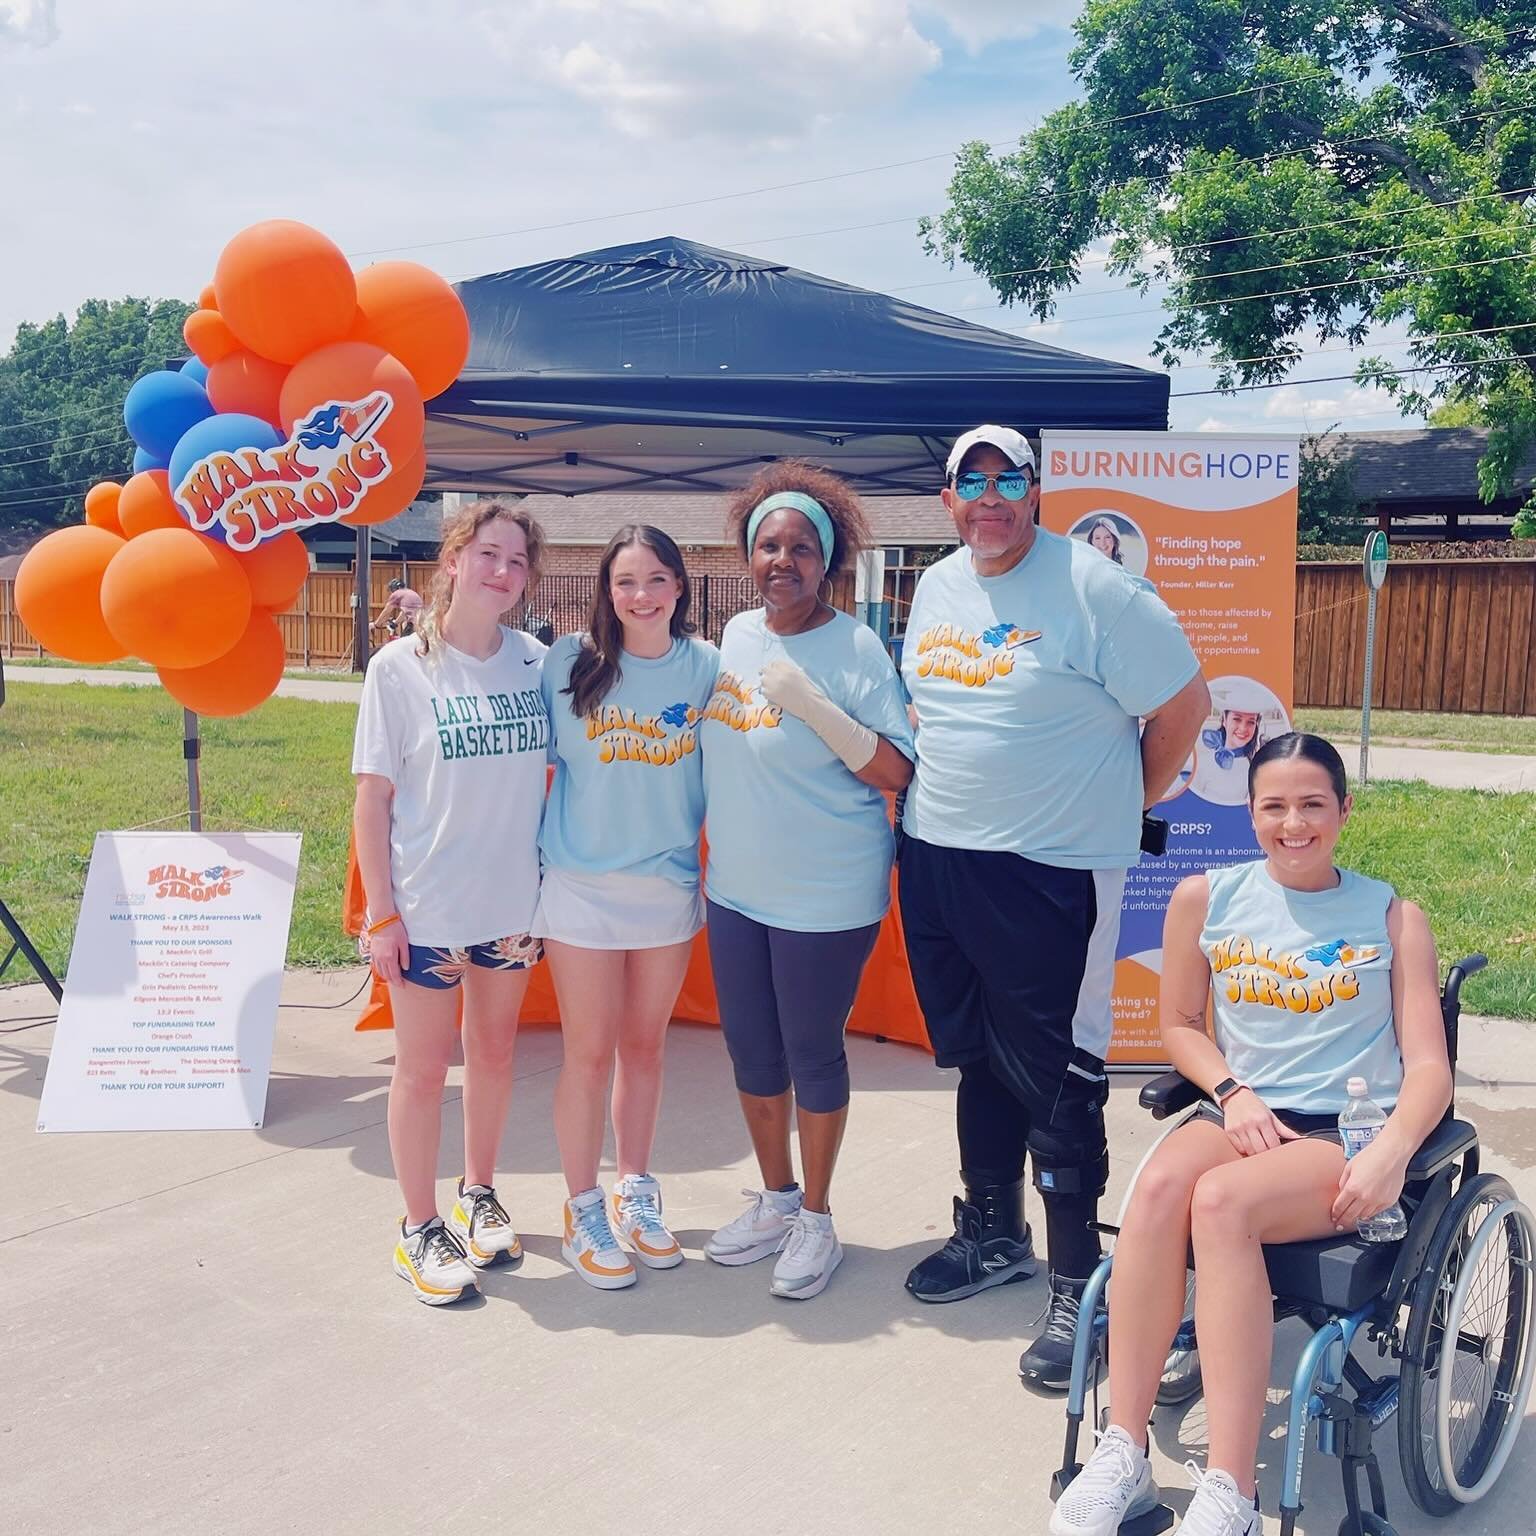 HEADS UP: Today is the LAST DAY to register your team for Walk Strong online! Invite your friends and family to donate or register for our 3k walk. Don&rsquo;t miss out on this exciting event to aid in CRPS research and treatment options for CRPS war